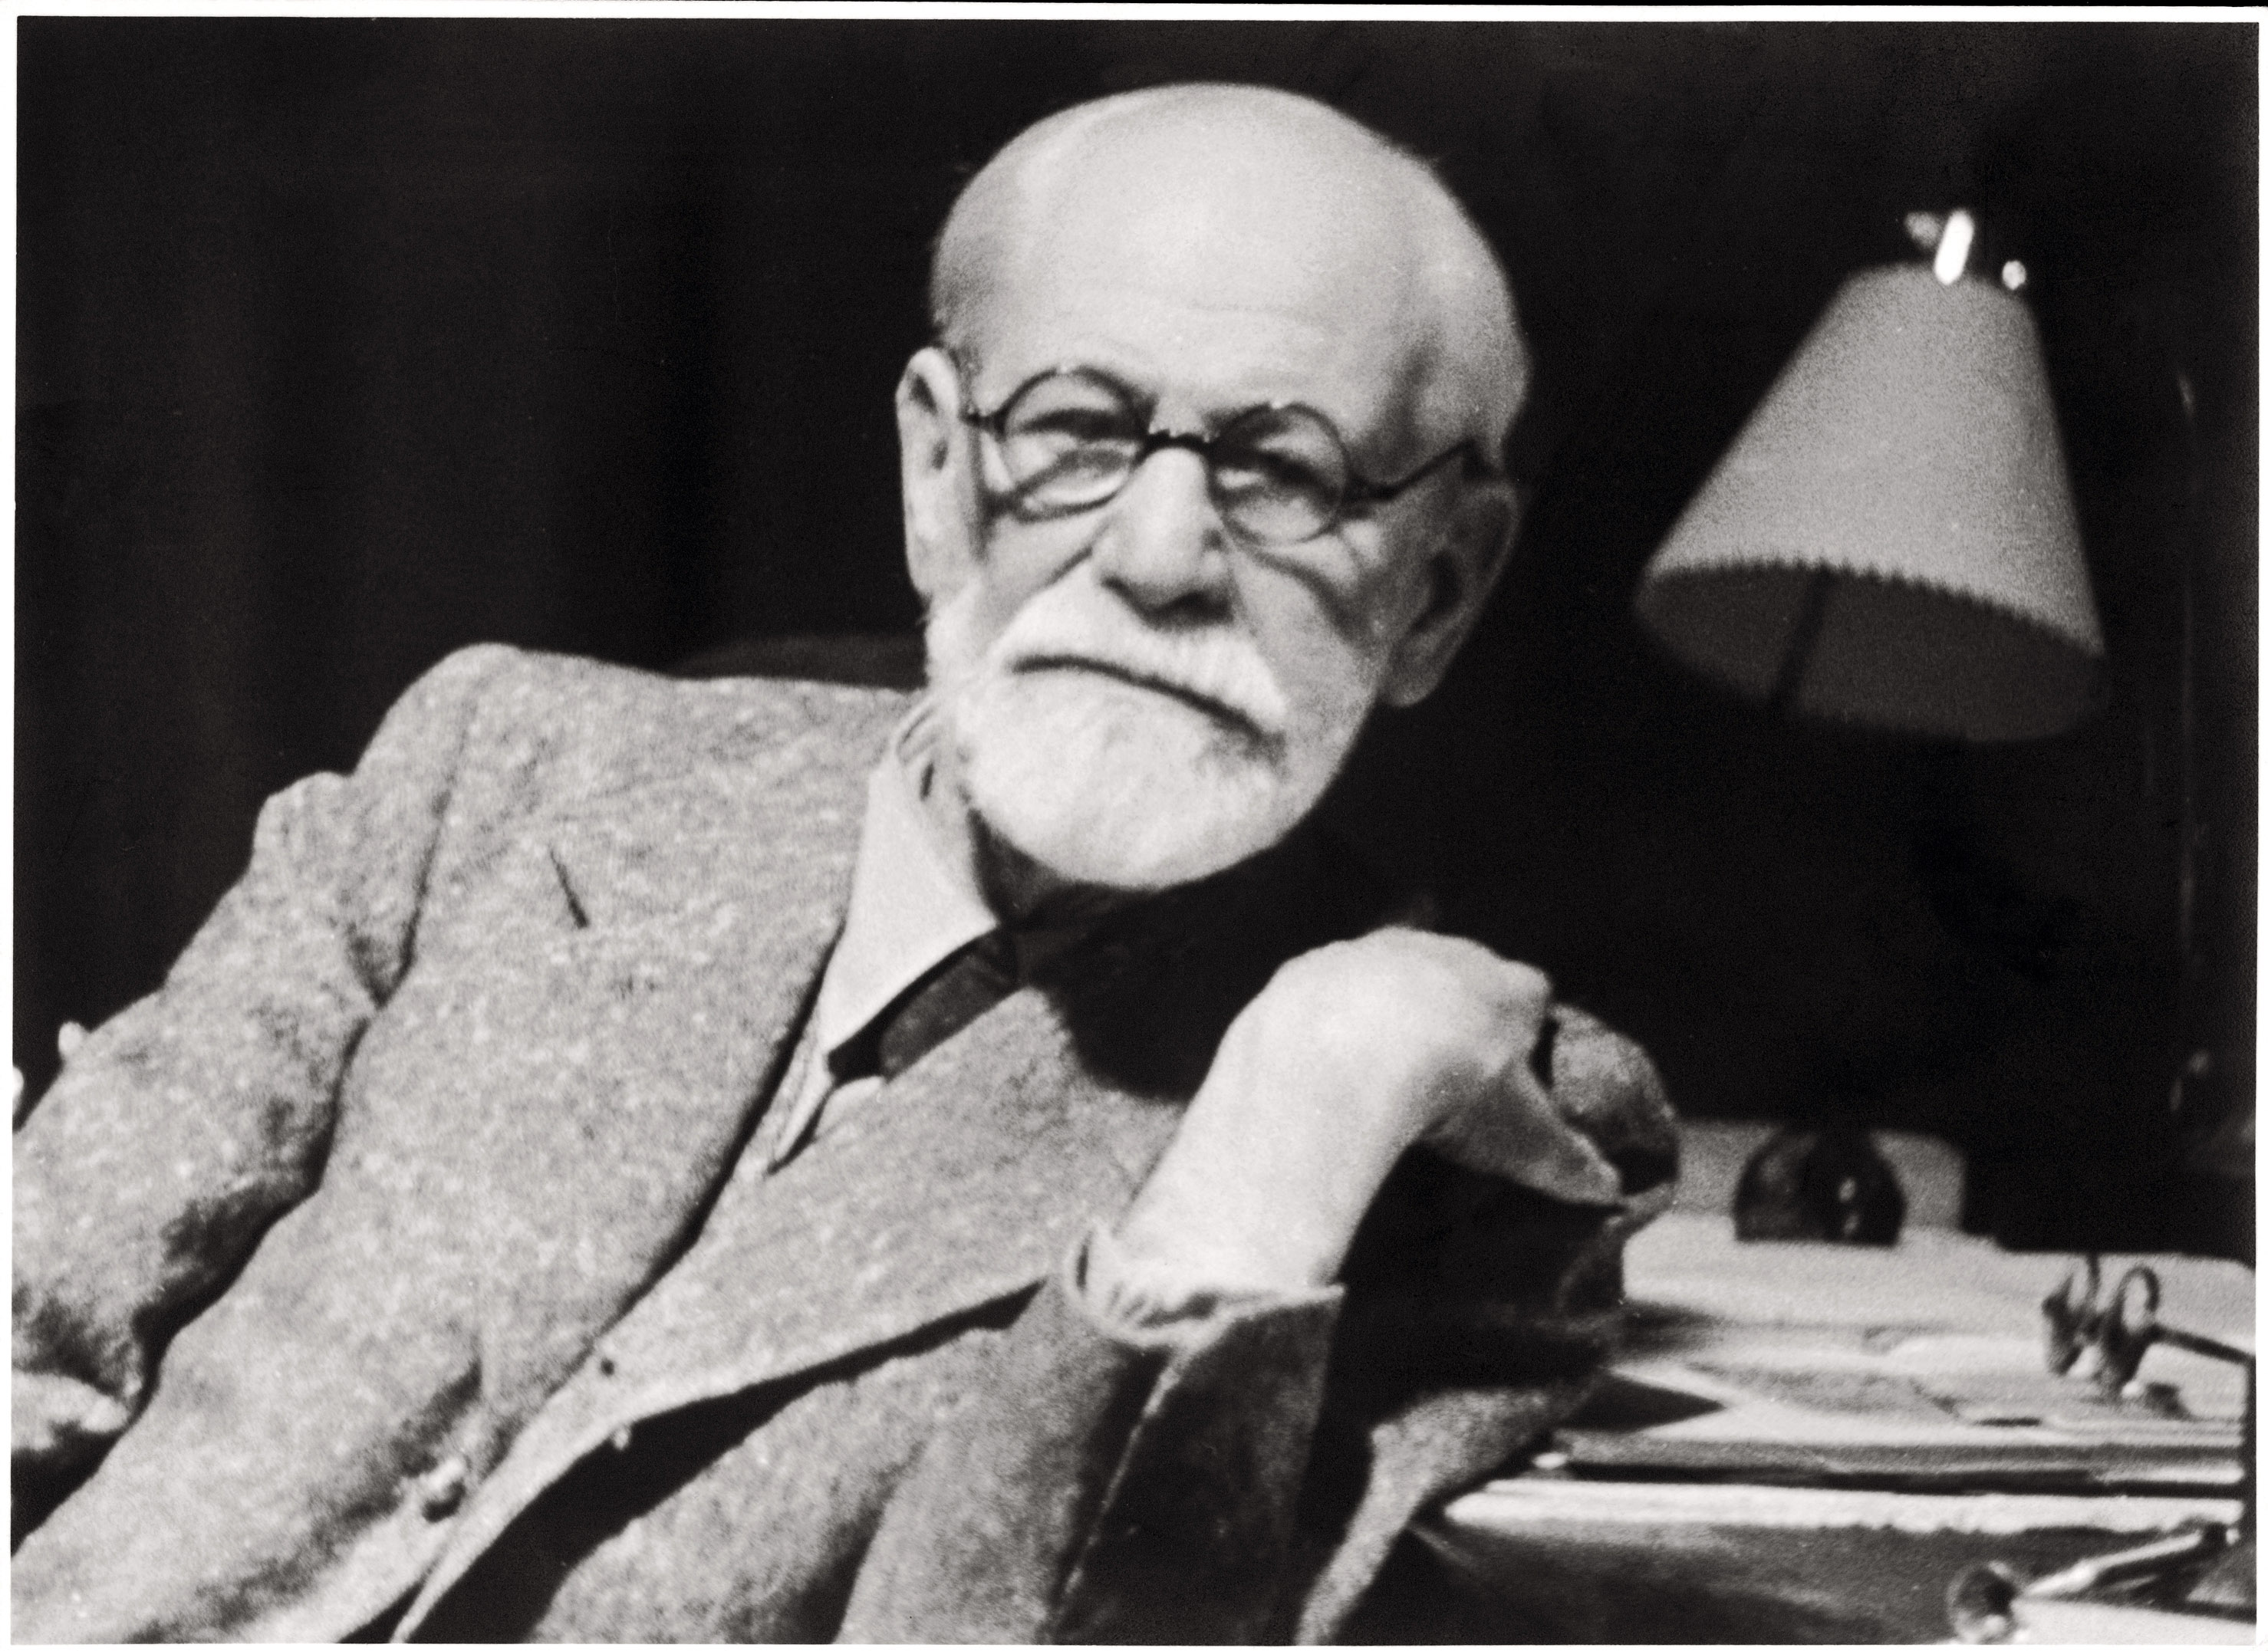 freud-in-30s-audio-and-video.jpg